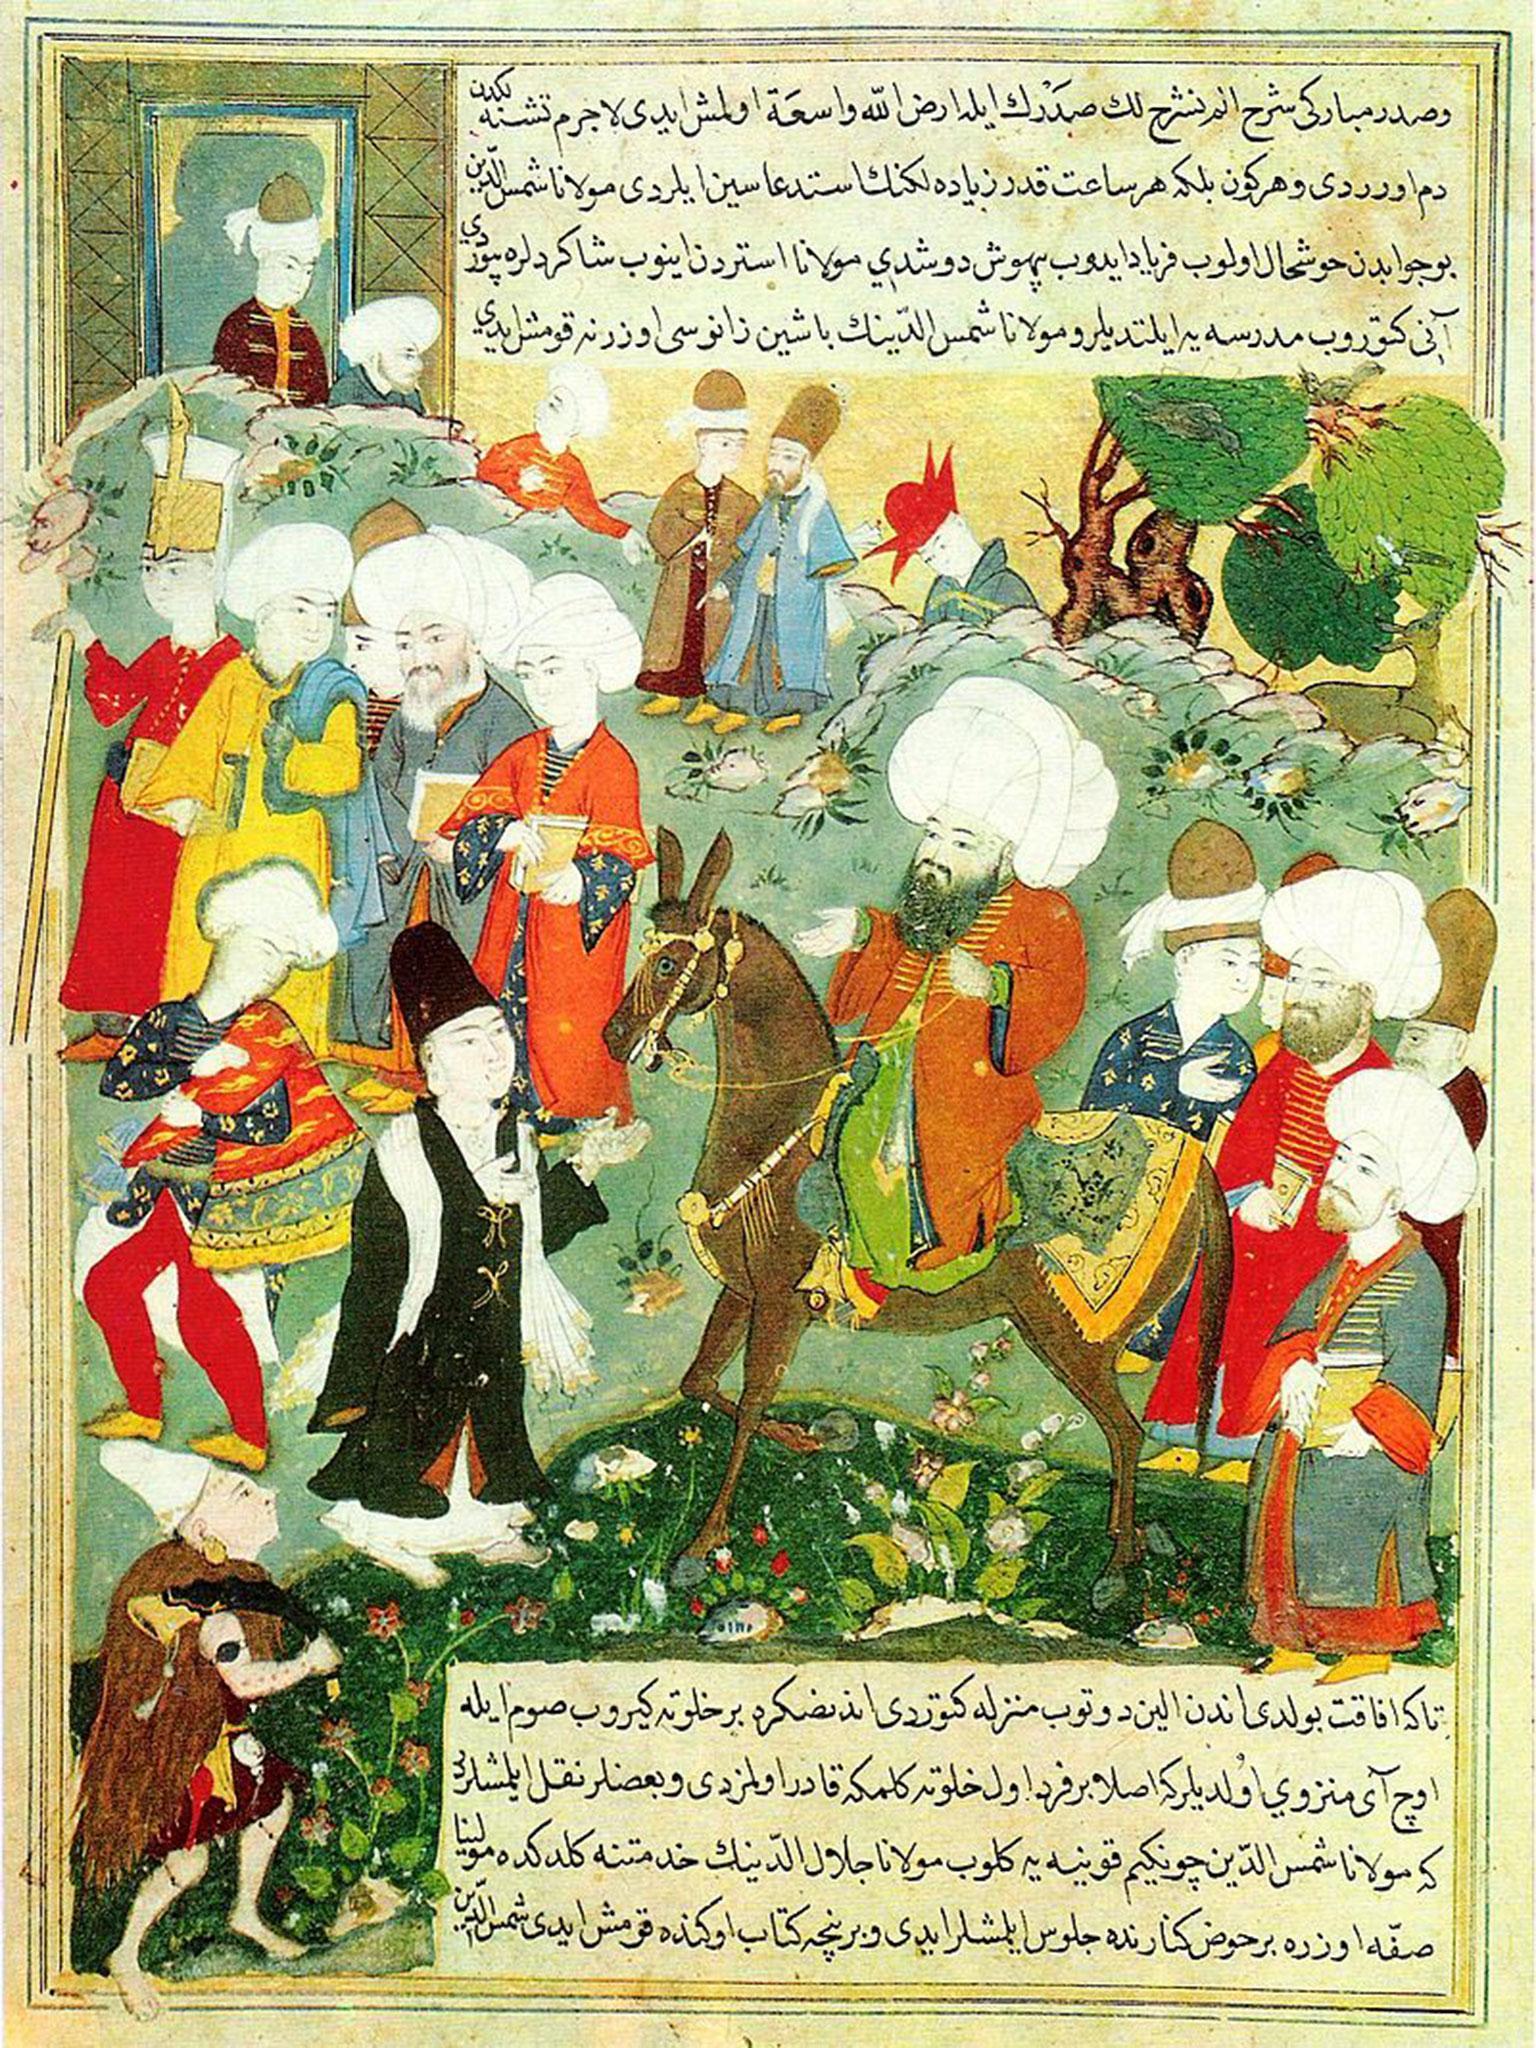 The meeting of Rumi and Shams-e Tabrizi depicted in a an Ottoman-era manuscript from the end of the 16th century.